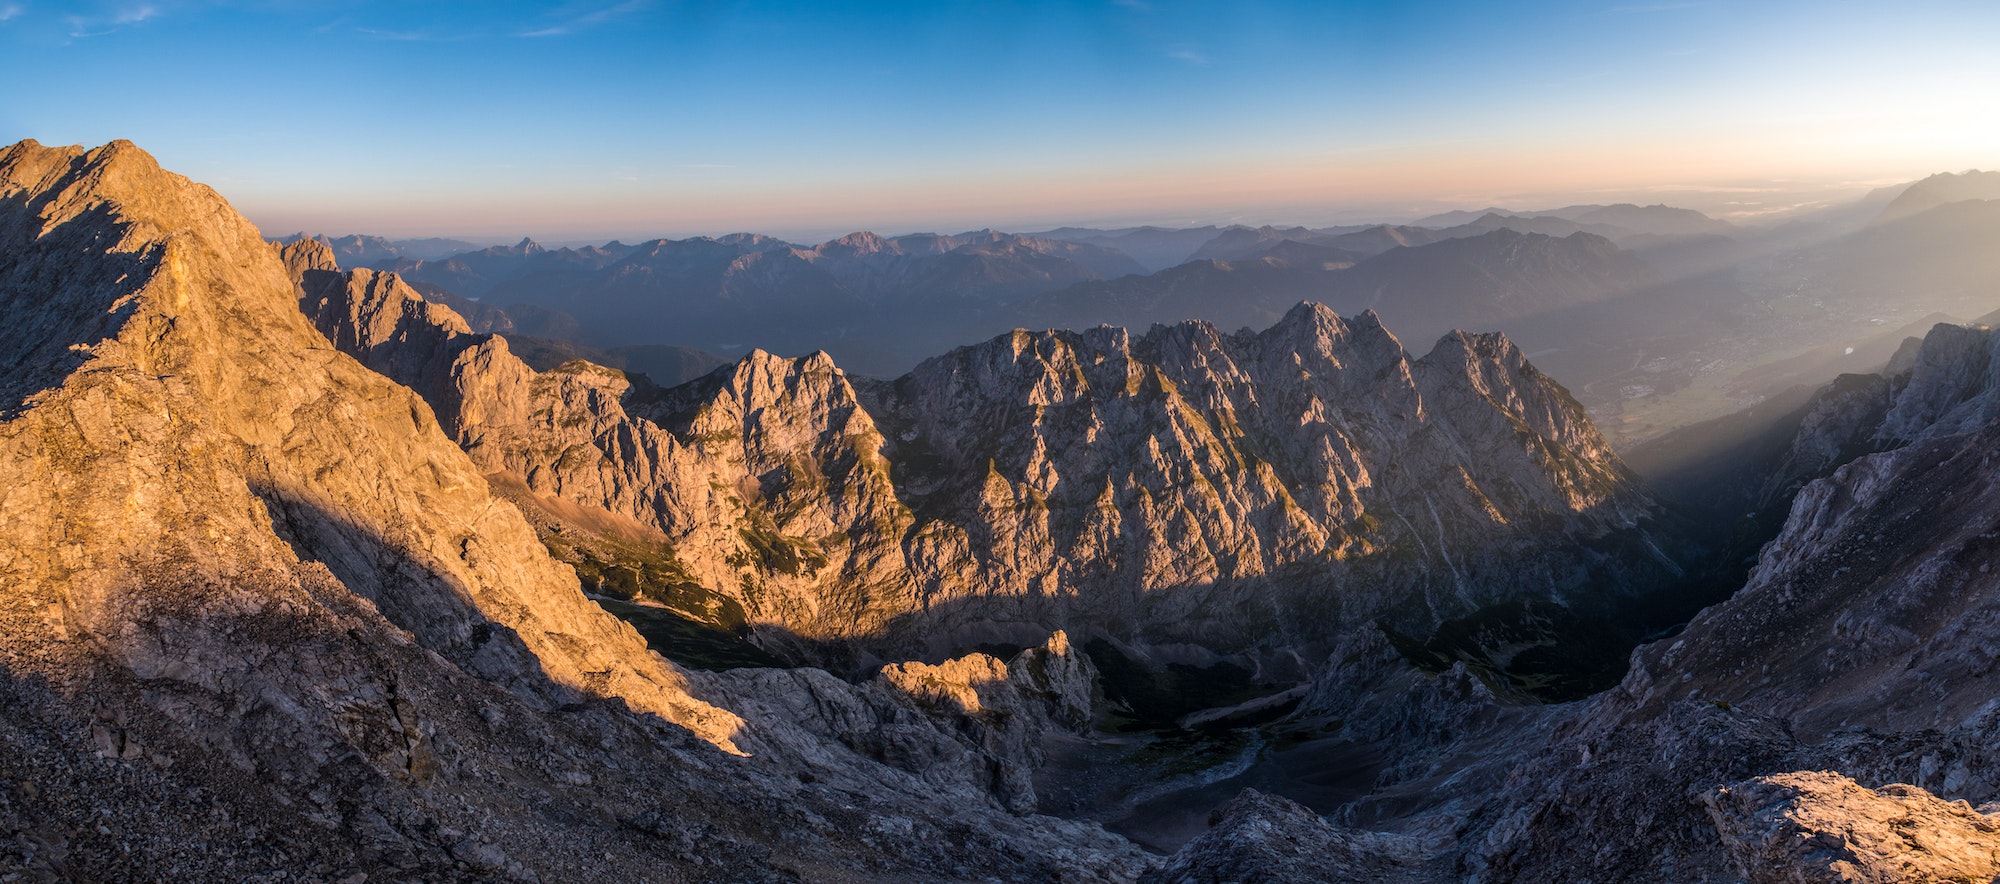 Scenic view of the Zugspitze mountain in Germany during sunset